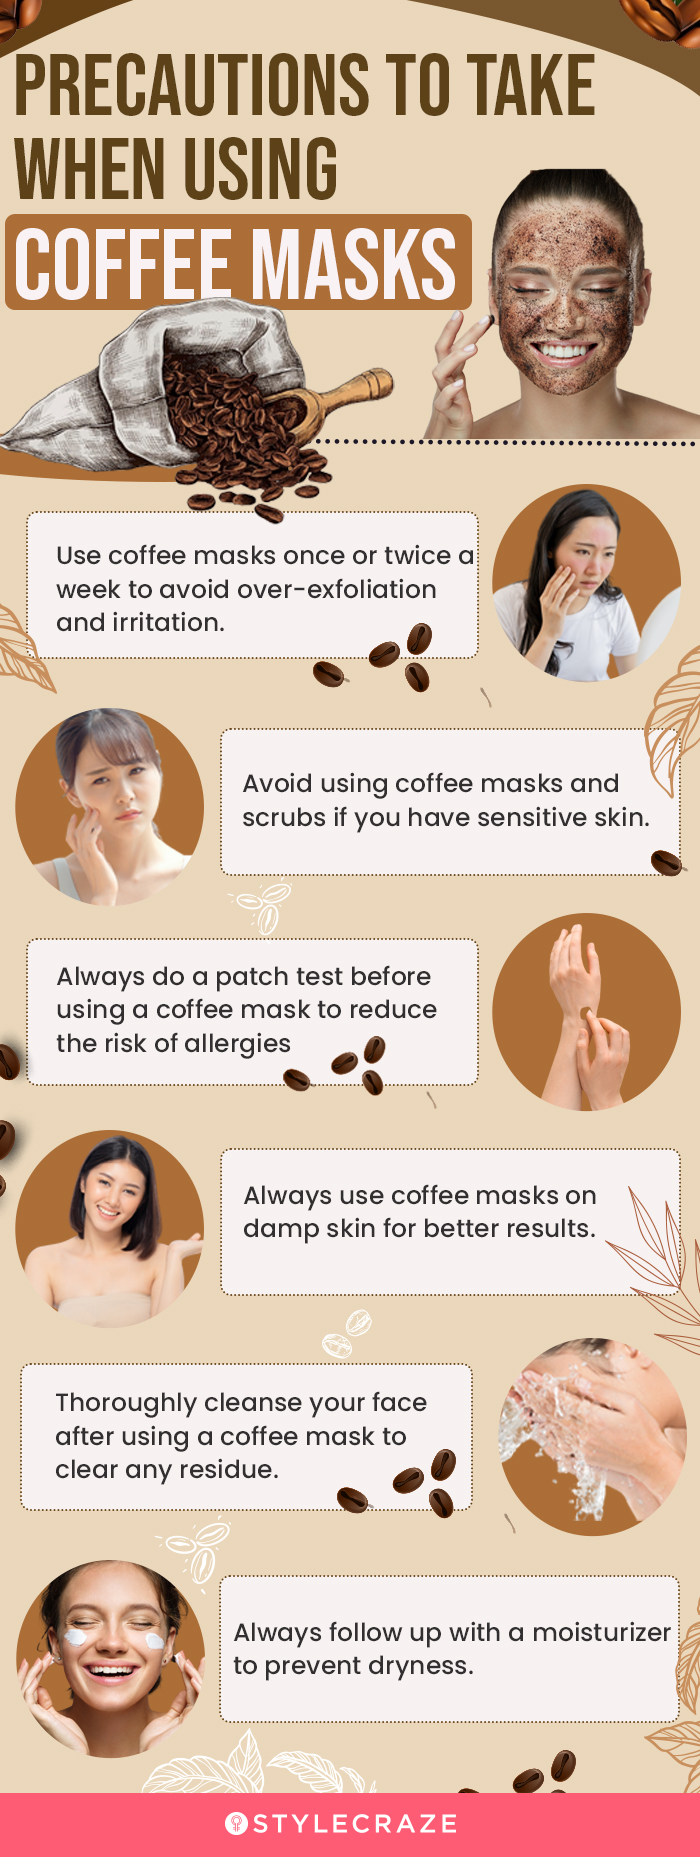 precautions to take when using coffee masks [infographic]